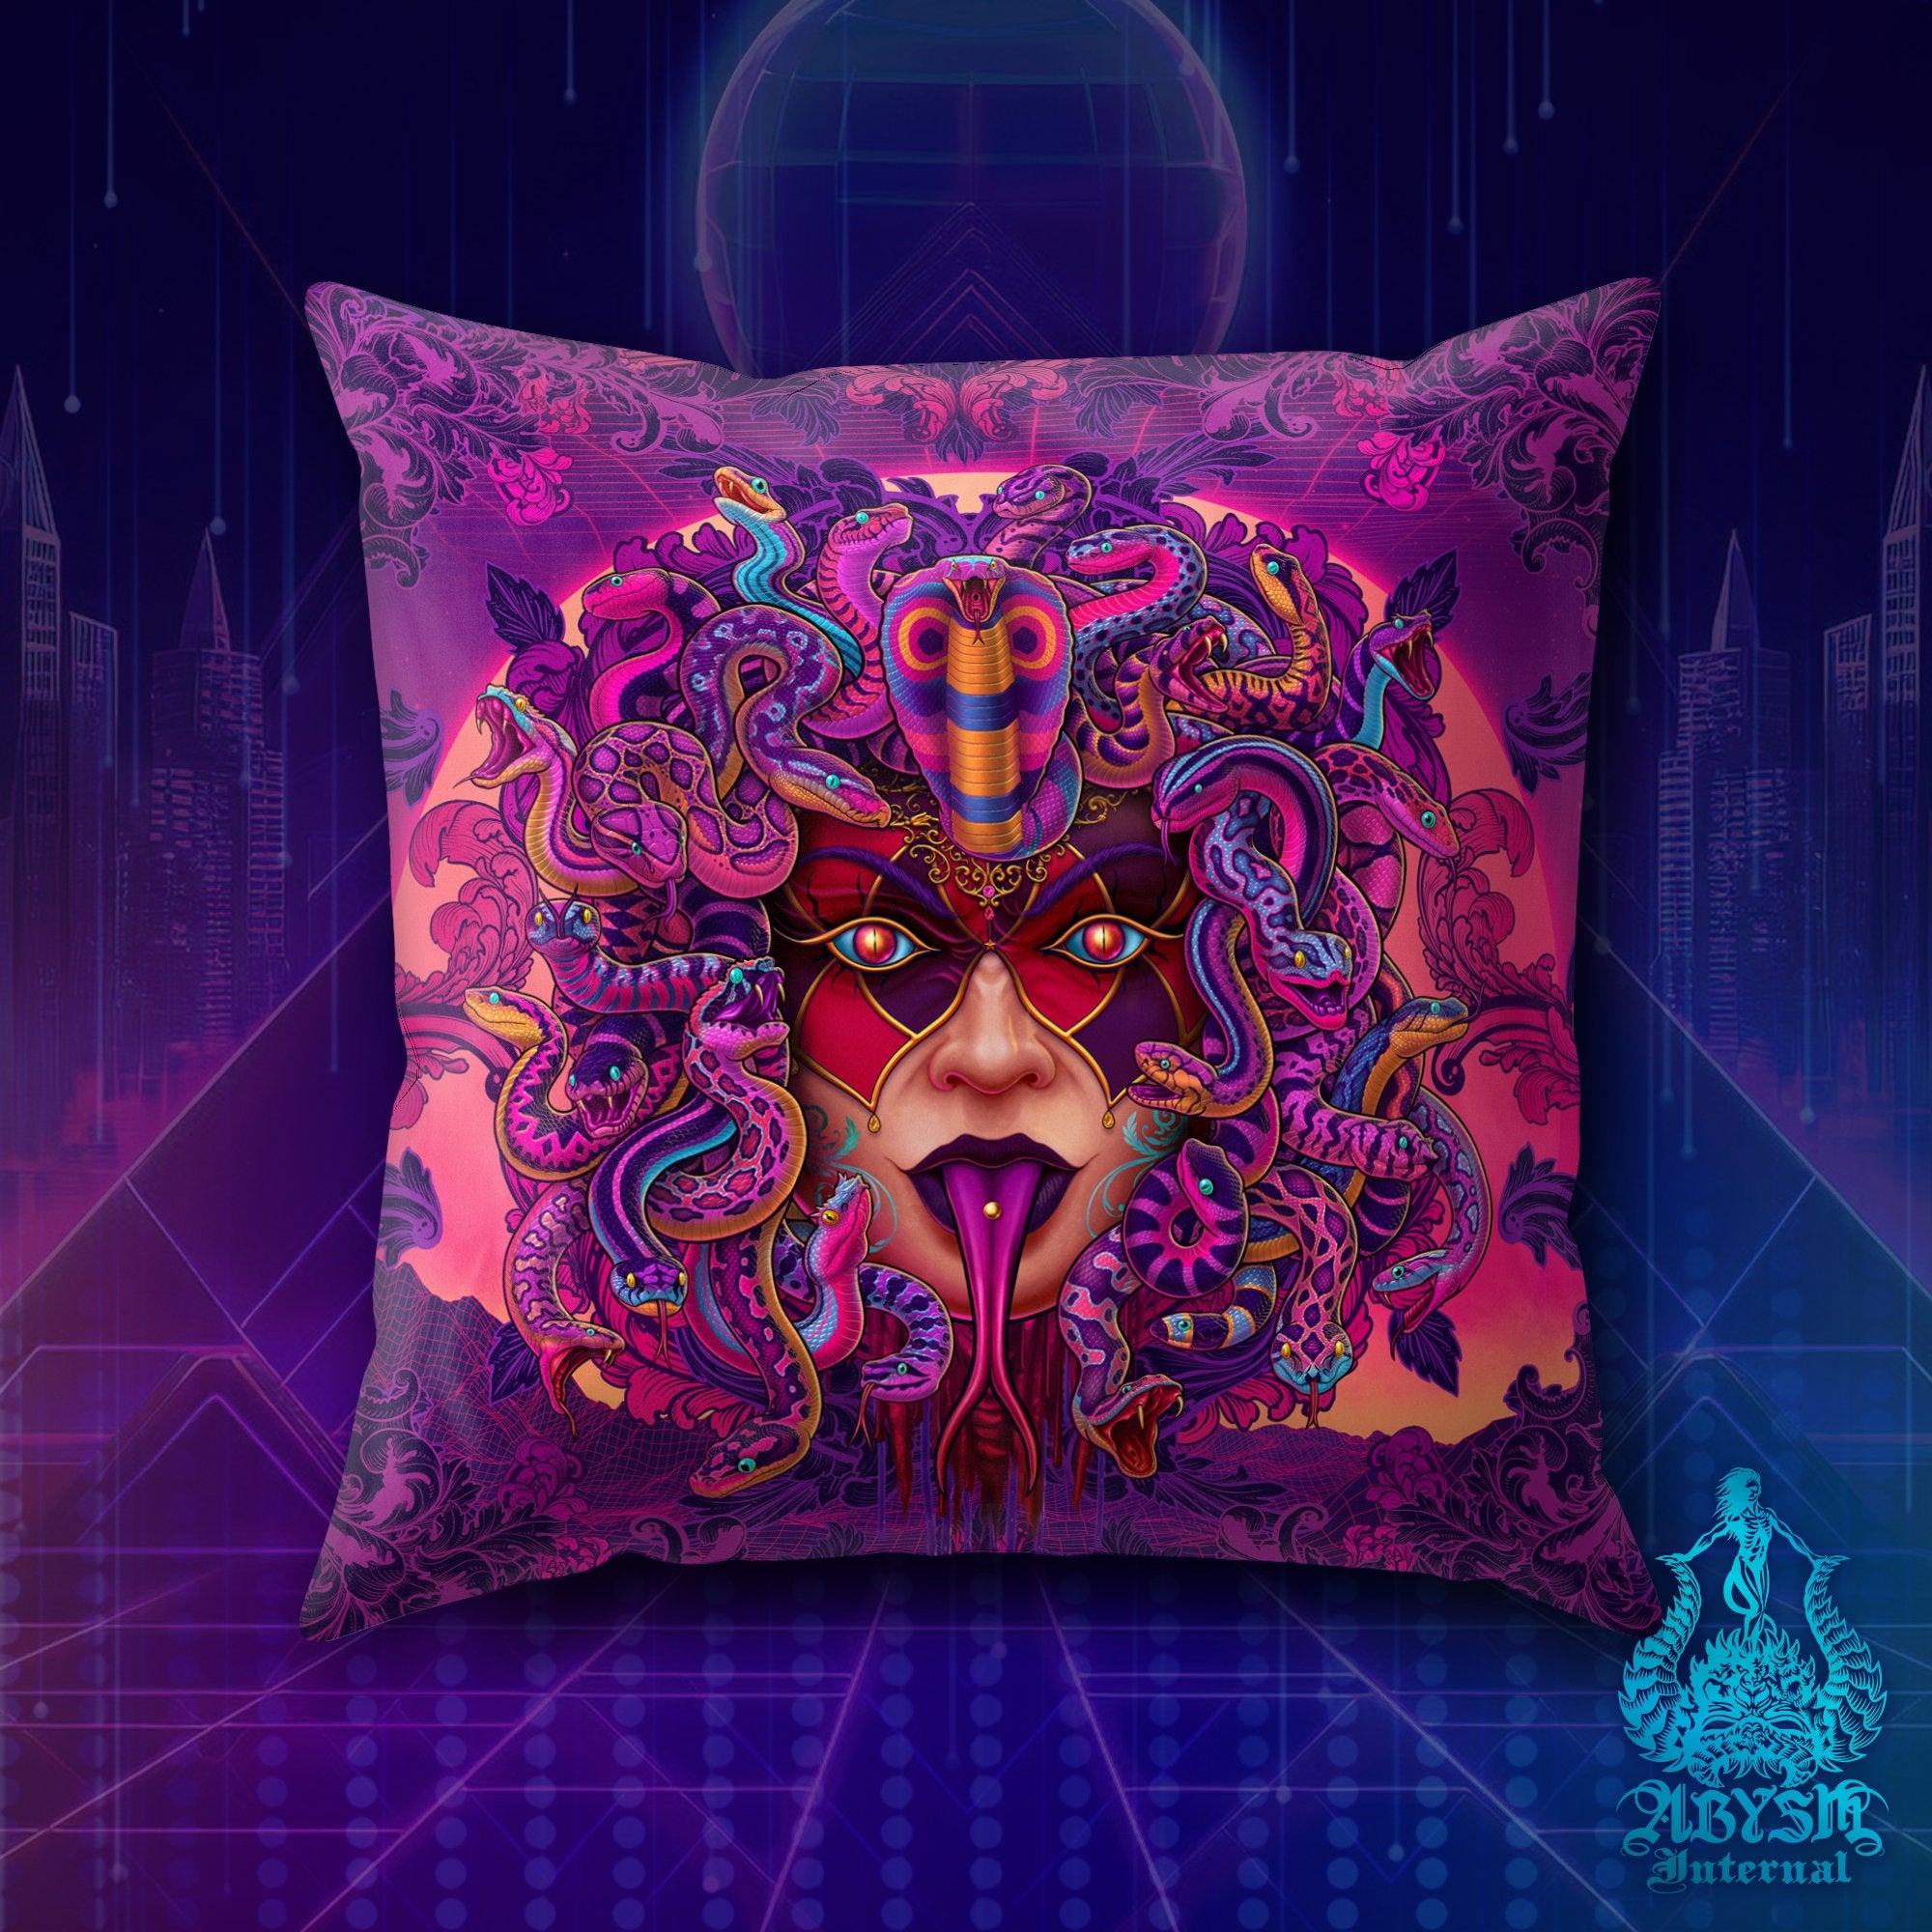 Psychedelic Throw Pillow, Vaporwave Decorative Accent Pillow, Square Cushion Cover, Retrowave 80s Room Decor, Synthwave Art Print - Medusa Skull, 4 Faces - Abysm Internal